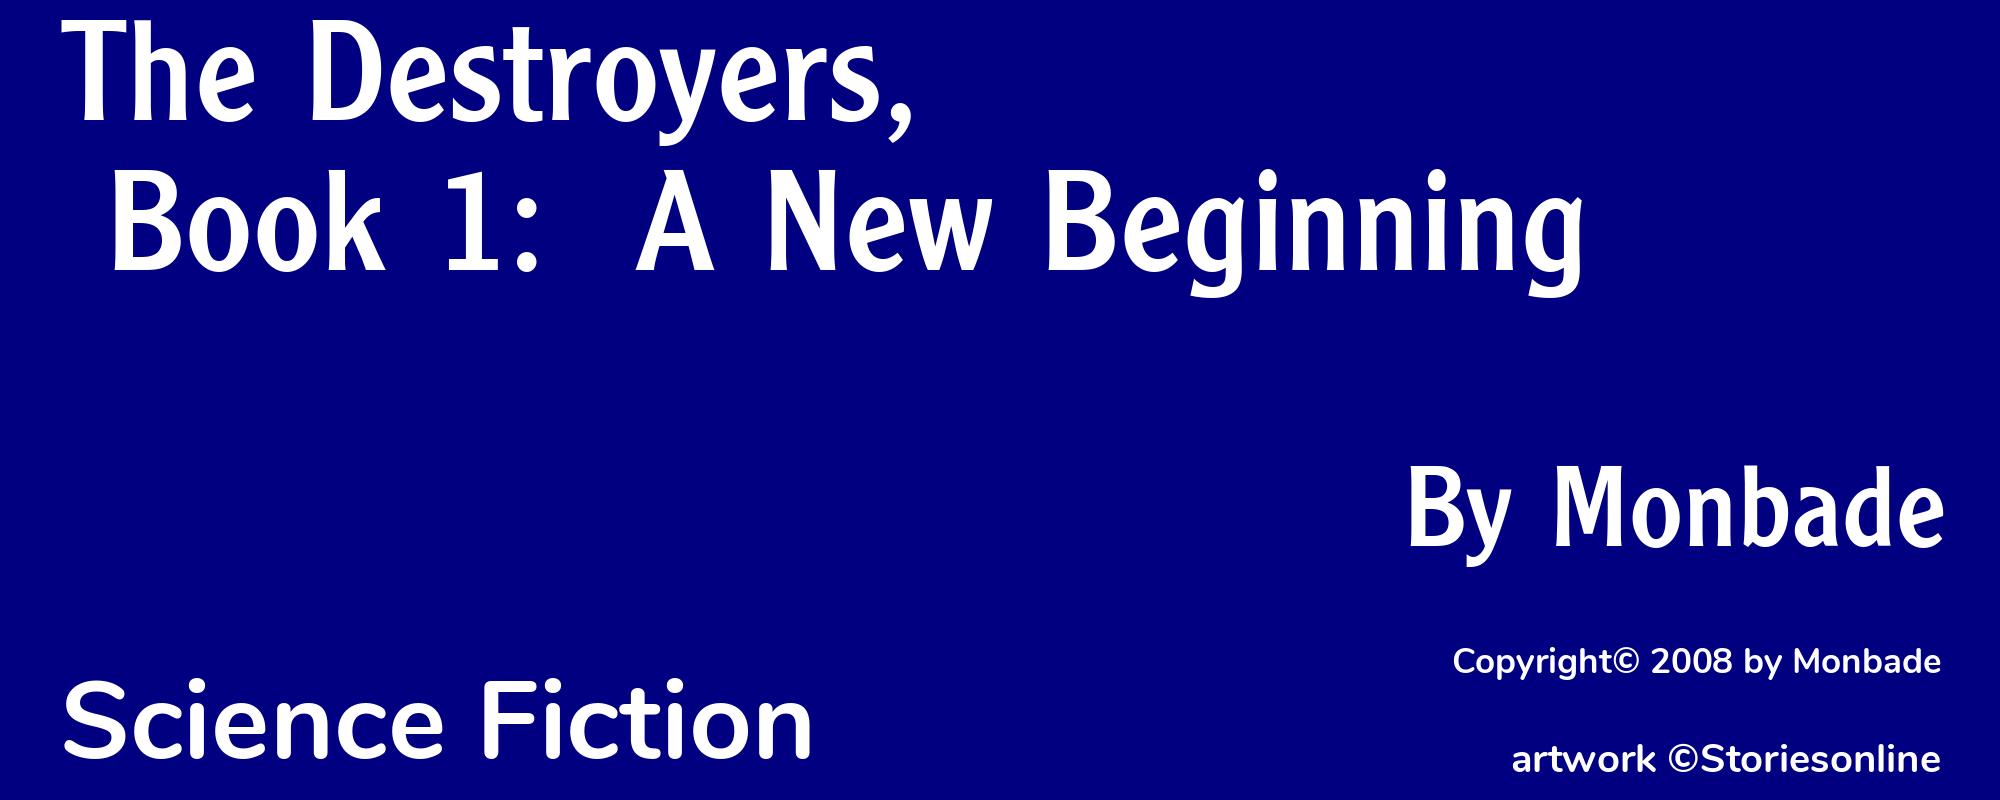 The Destroyers, Book 1:  A New Beginning - Cover